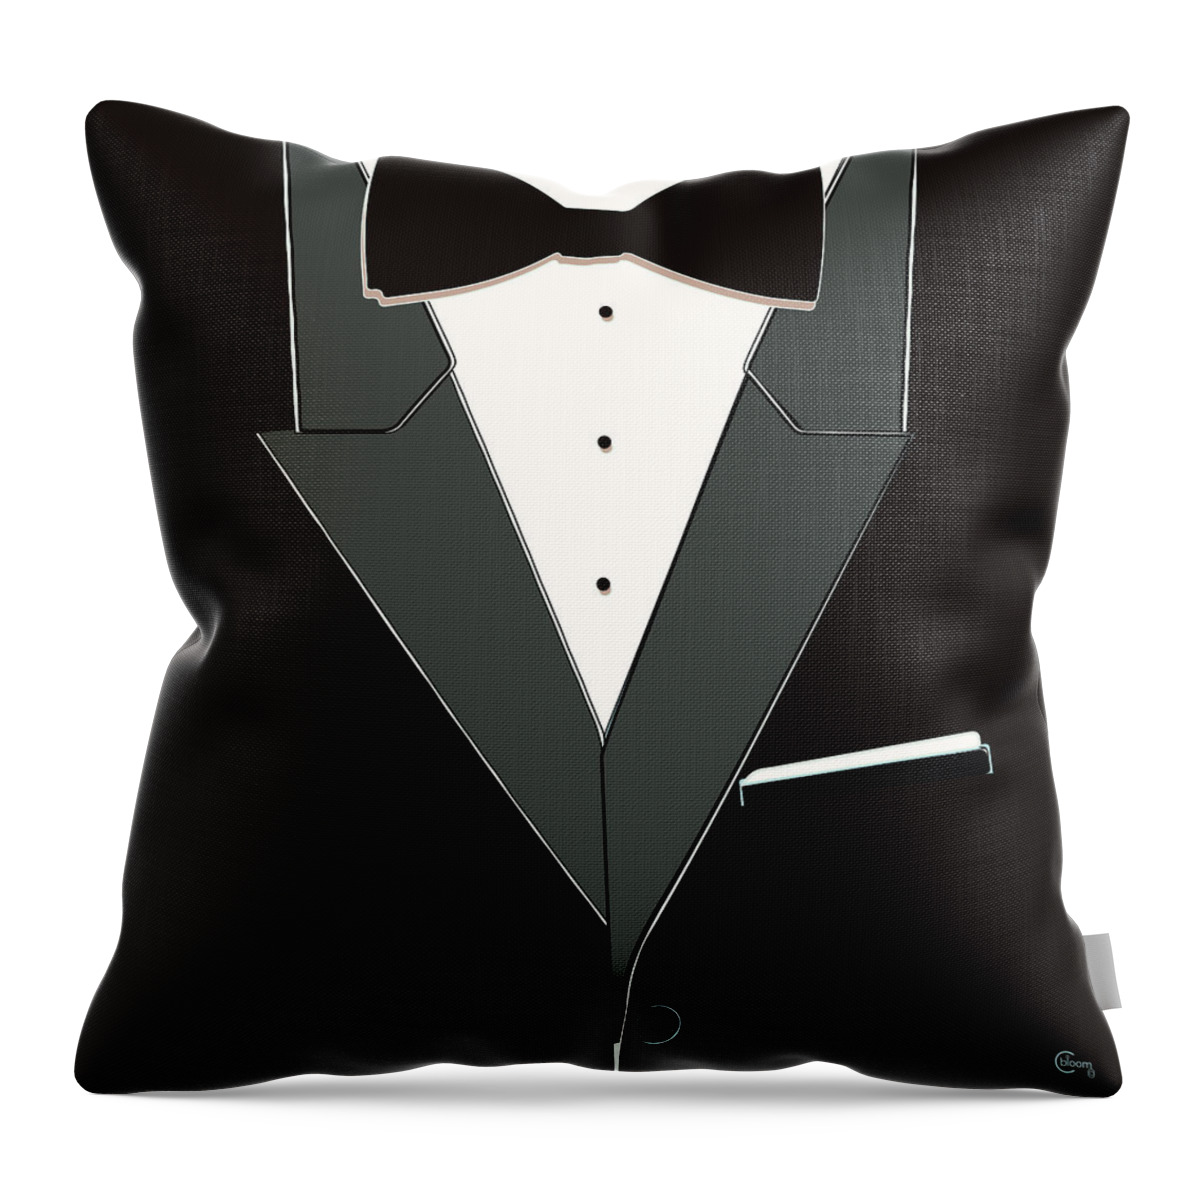 Tuxedo Black Tie Throw Pillow featuring the drawing Tuxedo Black Tie by Cecely Bloom